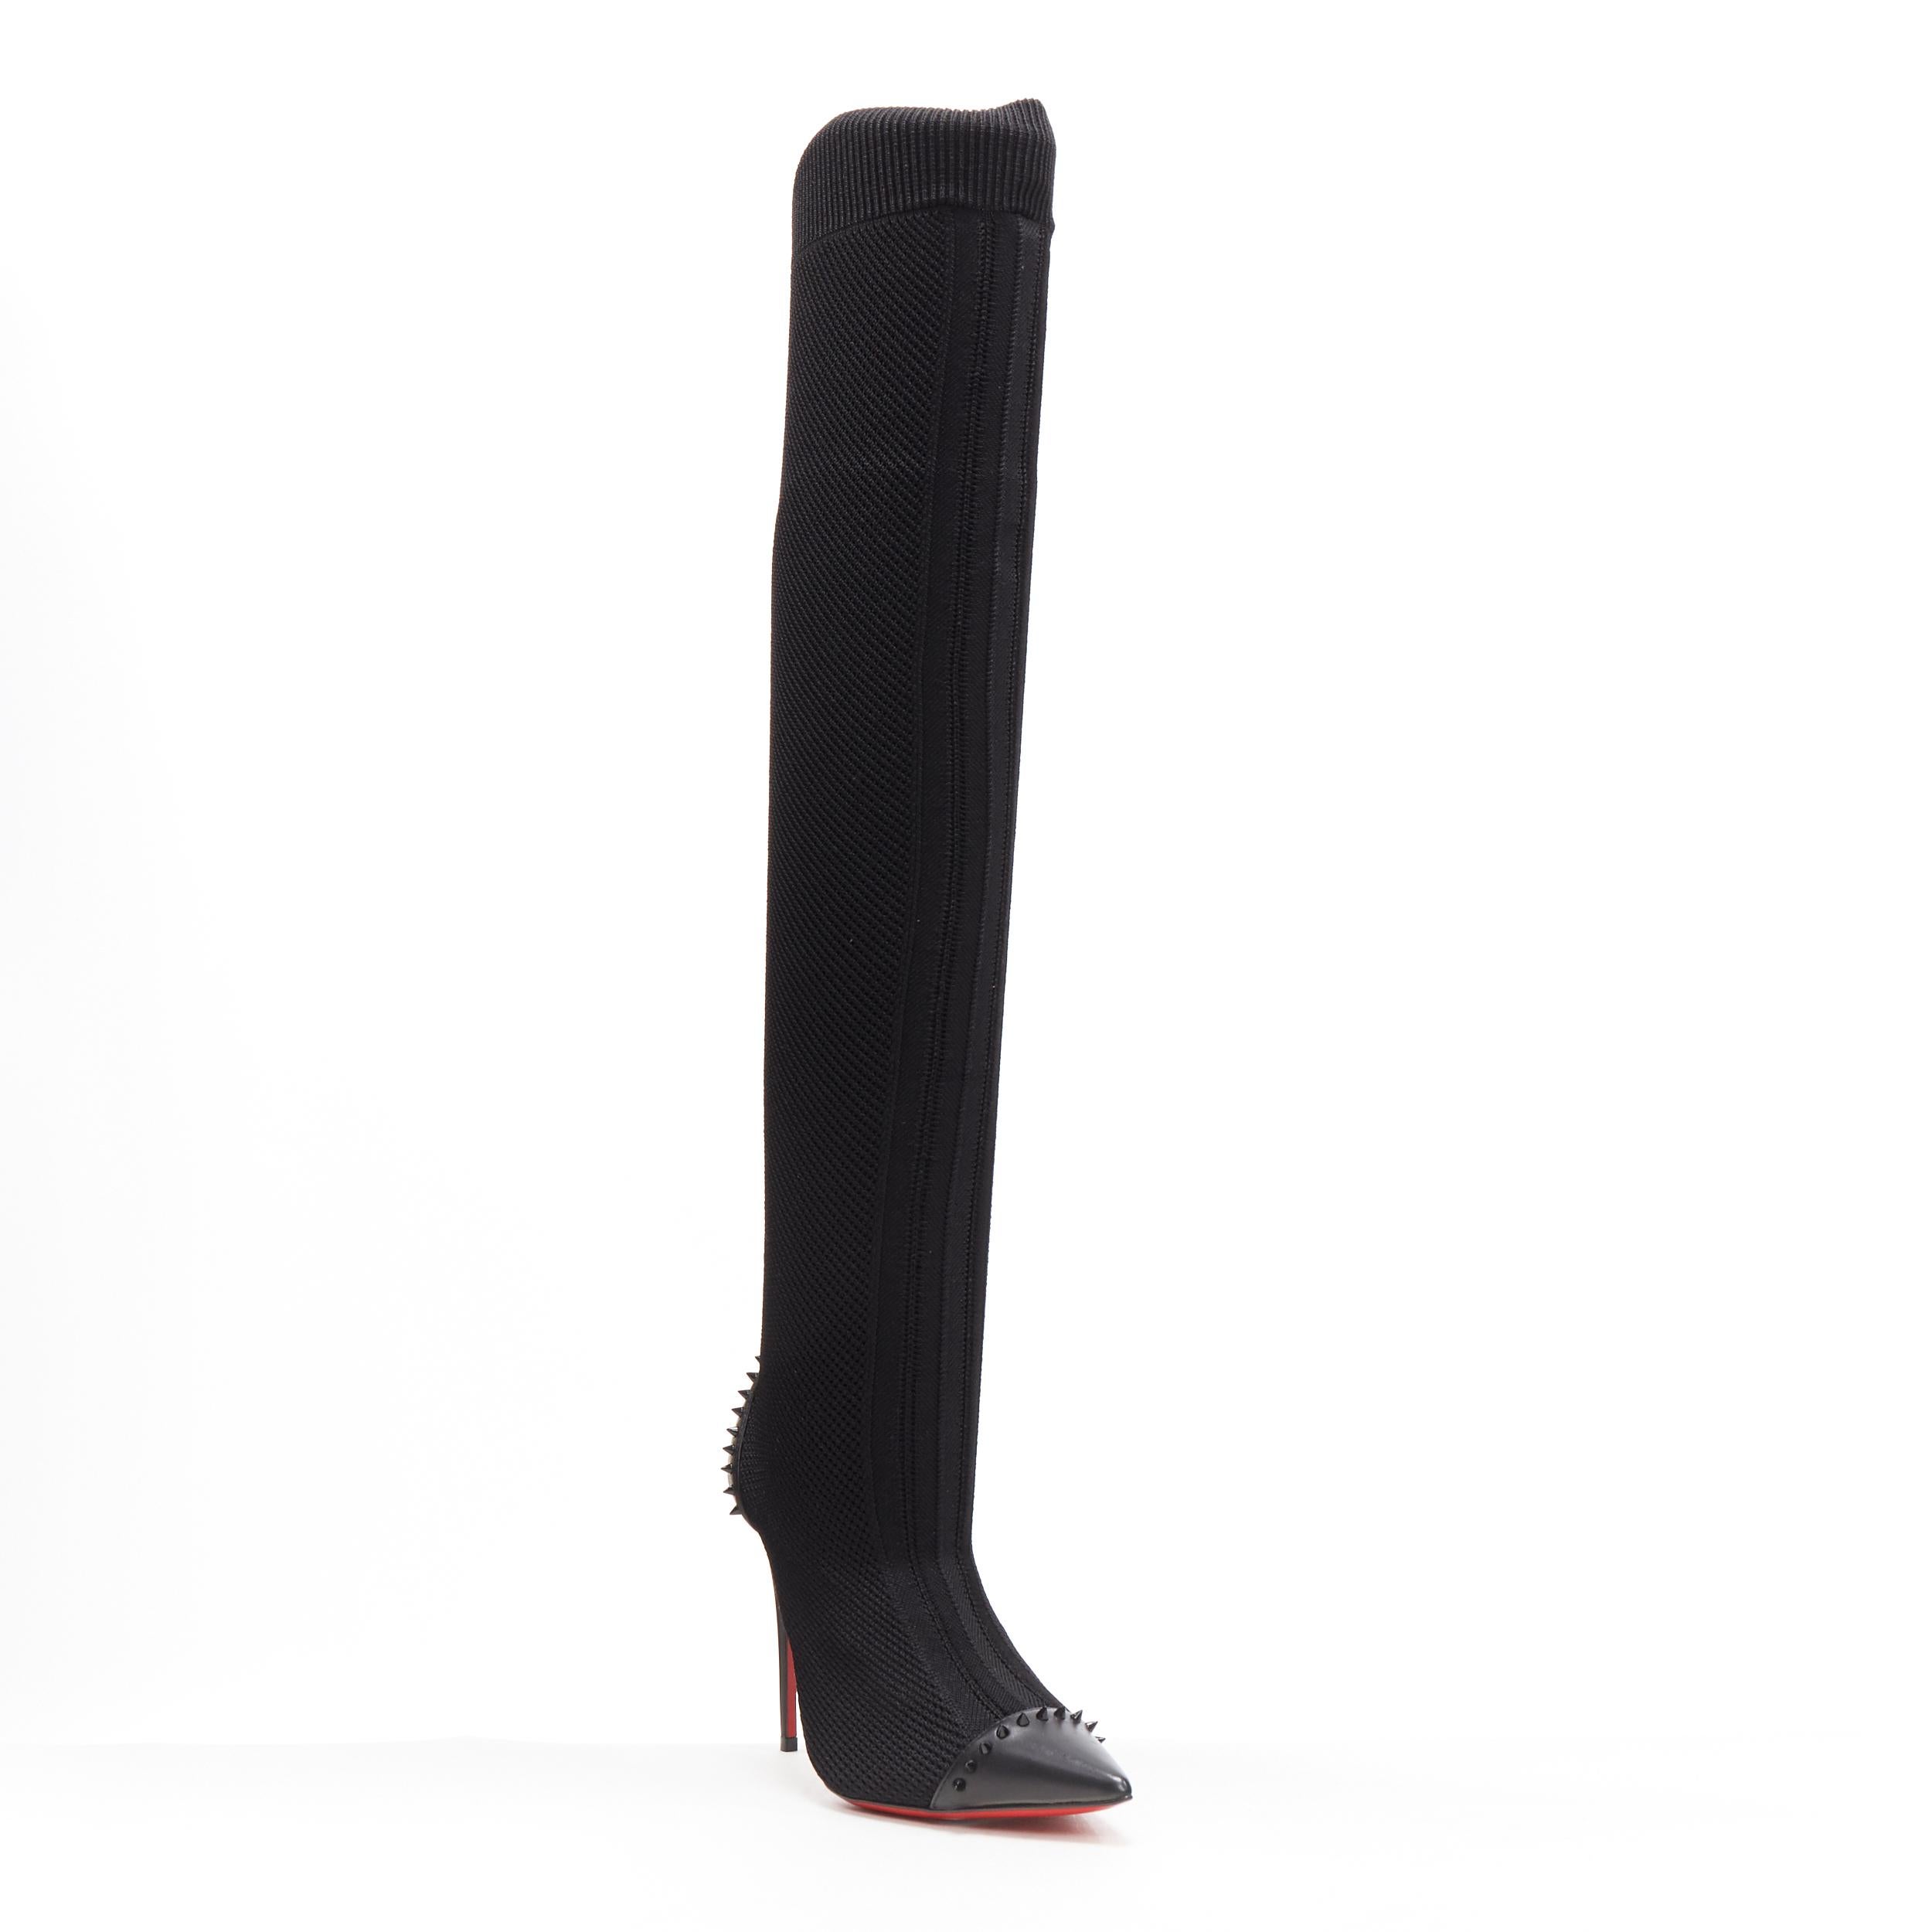 new CHRISTIAN LOUBOUTIN Souricette 100 black studded knee high sock boot EU37
Brand: Christian Louboutin
Designer: Christian Louboutin
Model Name / Style: Souricette 100
Material: Leather
Color: Black
Pattern: Solid
Closure: Pull on
Extra Detail: